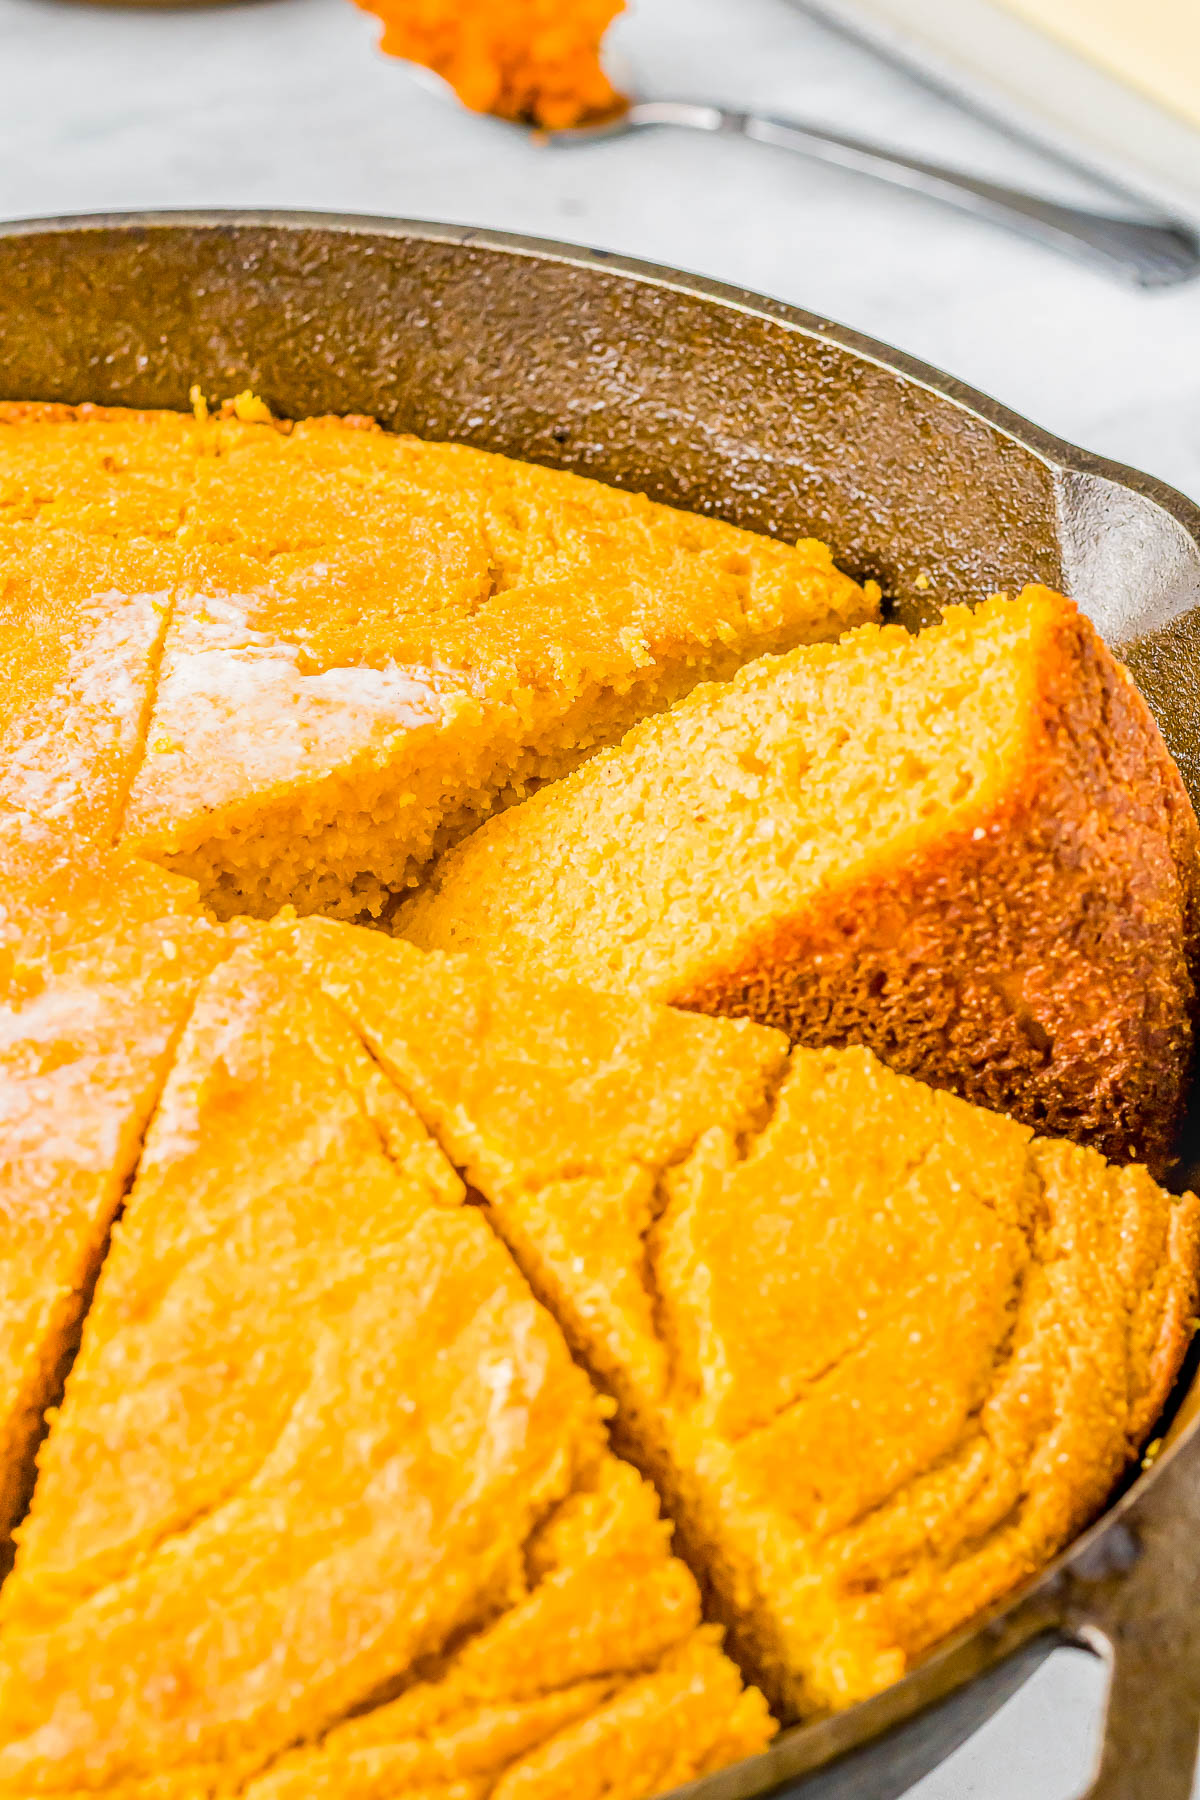 Sweet Potato Cornbread – Homemade cornbread just got better because it’s jazzed up with mashed sweet potatoes, brown sugar, and pumpkin pie spice! Thanks to the natural moisture from sweet potatoes and the addition of buttermilk, it’s so moist and flavorful! Whether you’re looking for a fall-inspired comfort food recipe or a new Thanksgiving or Christmas side dish, this cornbread is EASY and will become a new family FAVORITE!